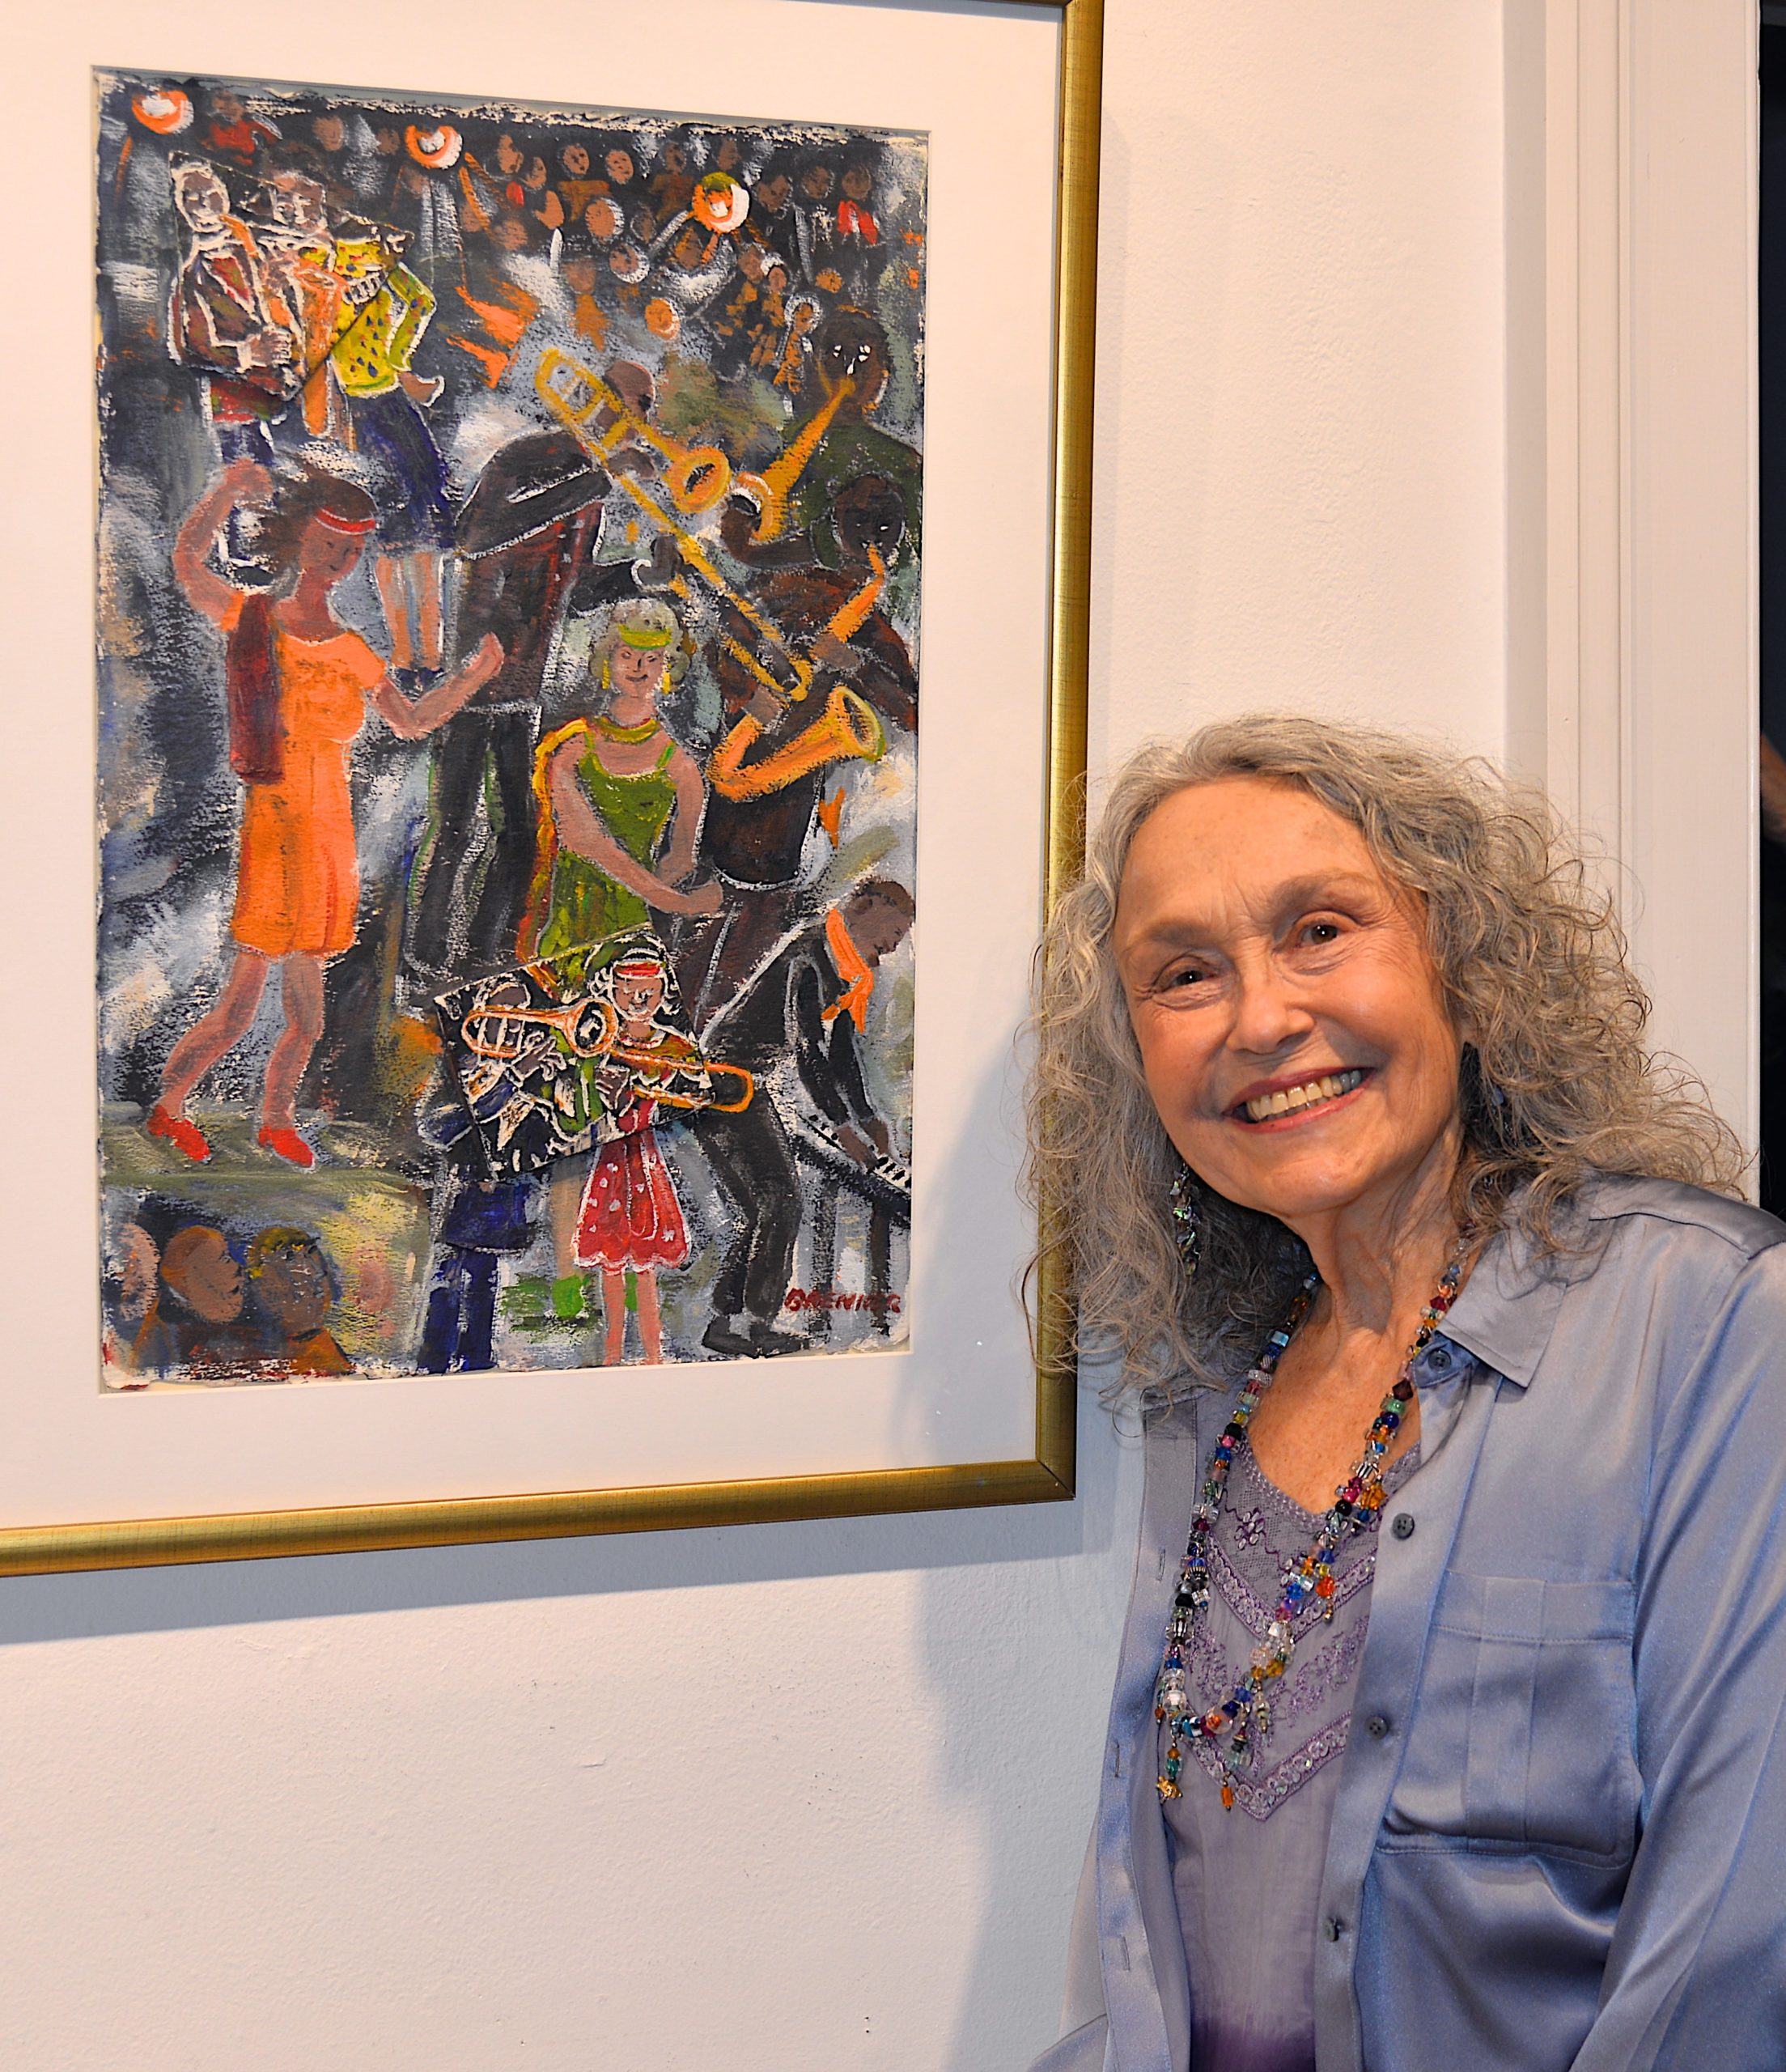 The Love And Passion art show, curated by Karyn Mannix, opened at Ashawagh Hall last weekend and featured art work, music, dancing and poetry.  Rosalind Brenner with her art work. KYRIL BROMLEY 